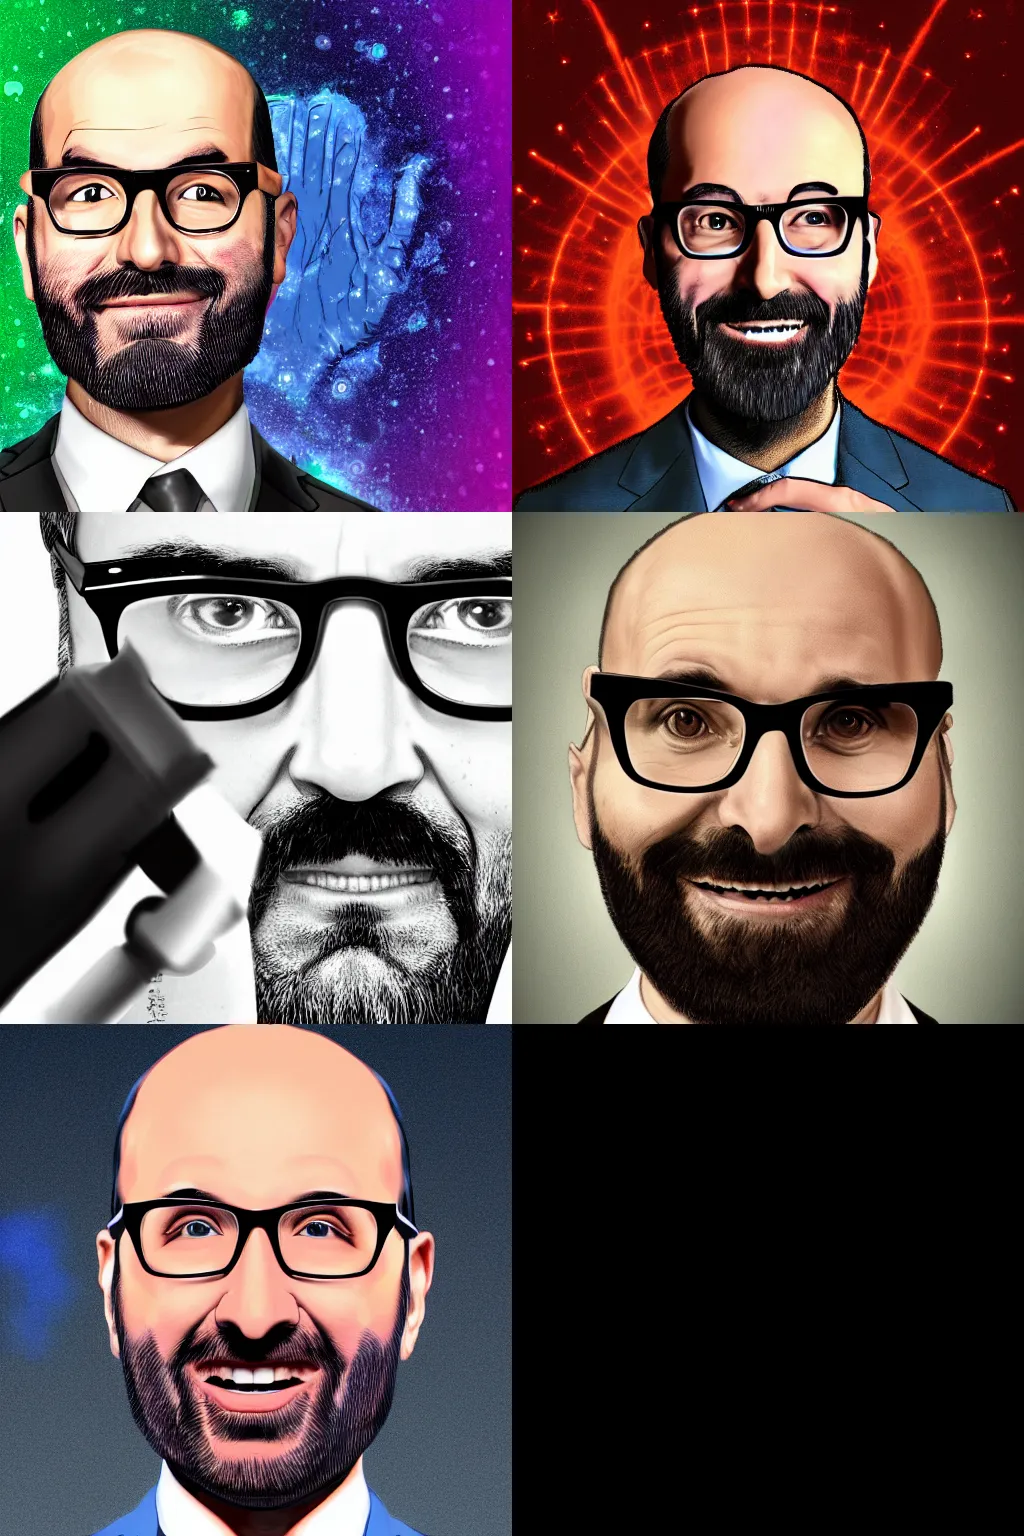 Prompt: Michael Vsauce ends the world, digital art